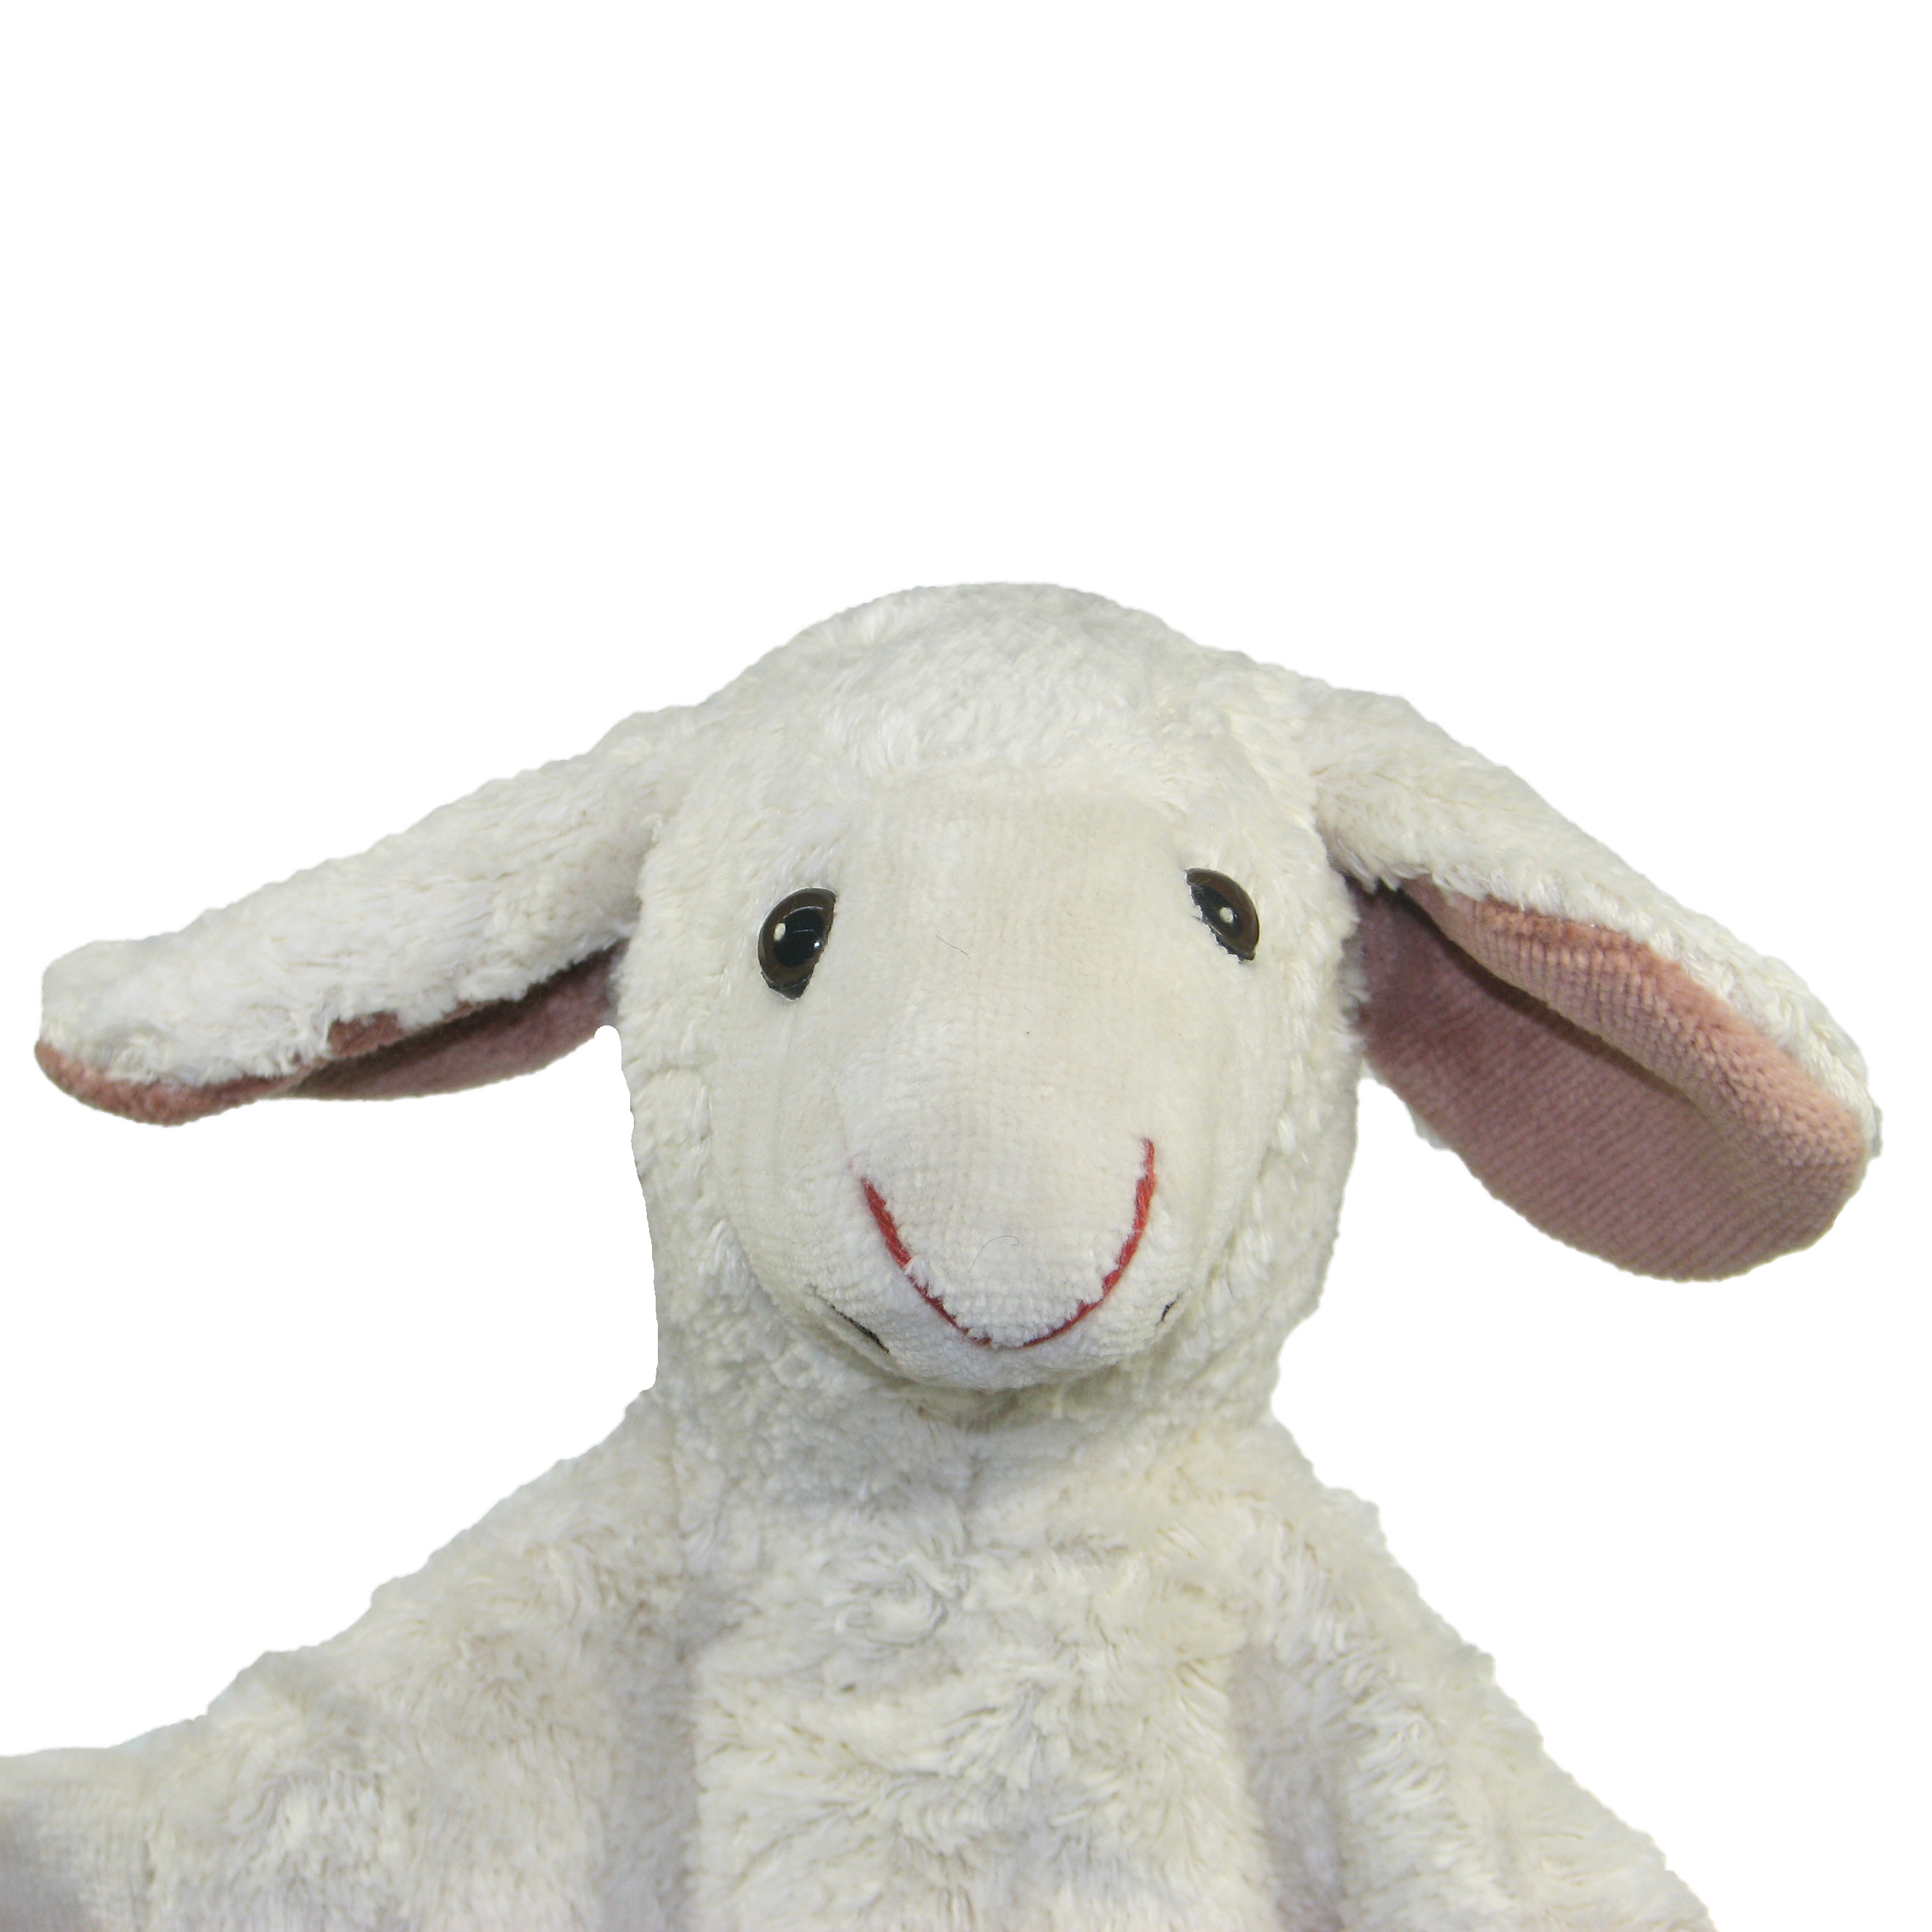 Hand puppet sheep - made of natural material - by Kallisto